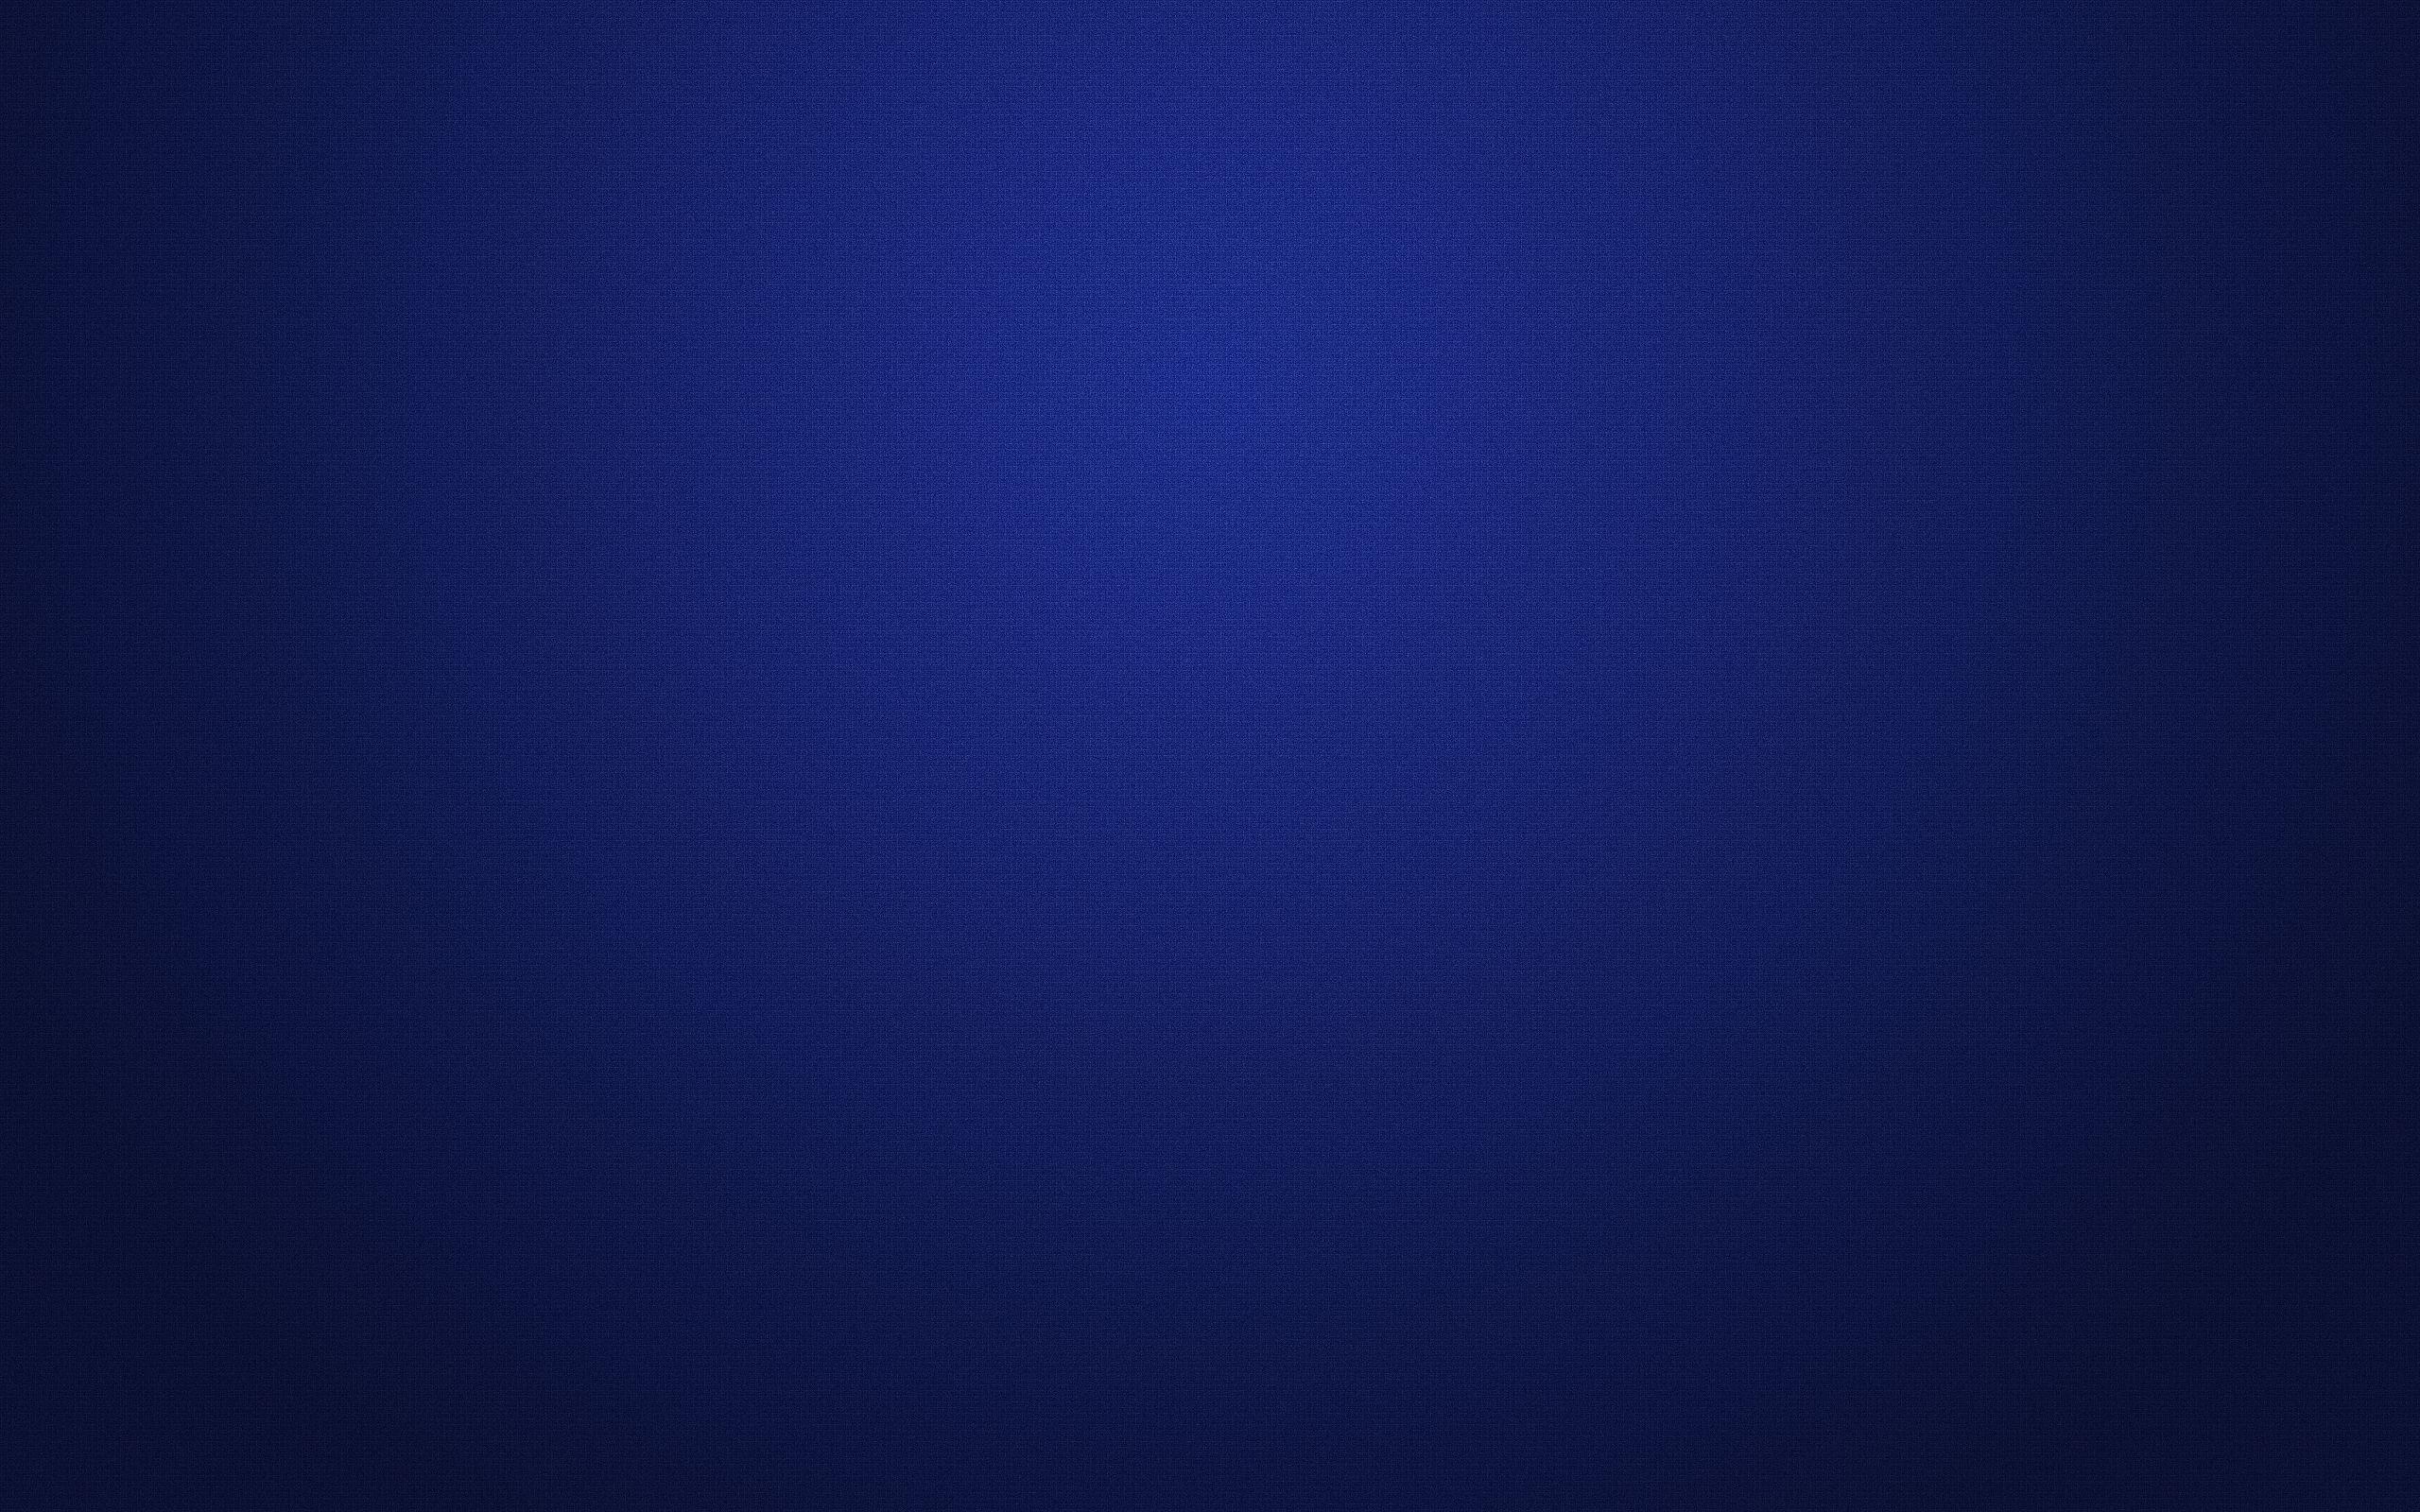 Teal Full Hd Background Blue Resolution